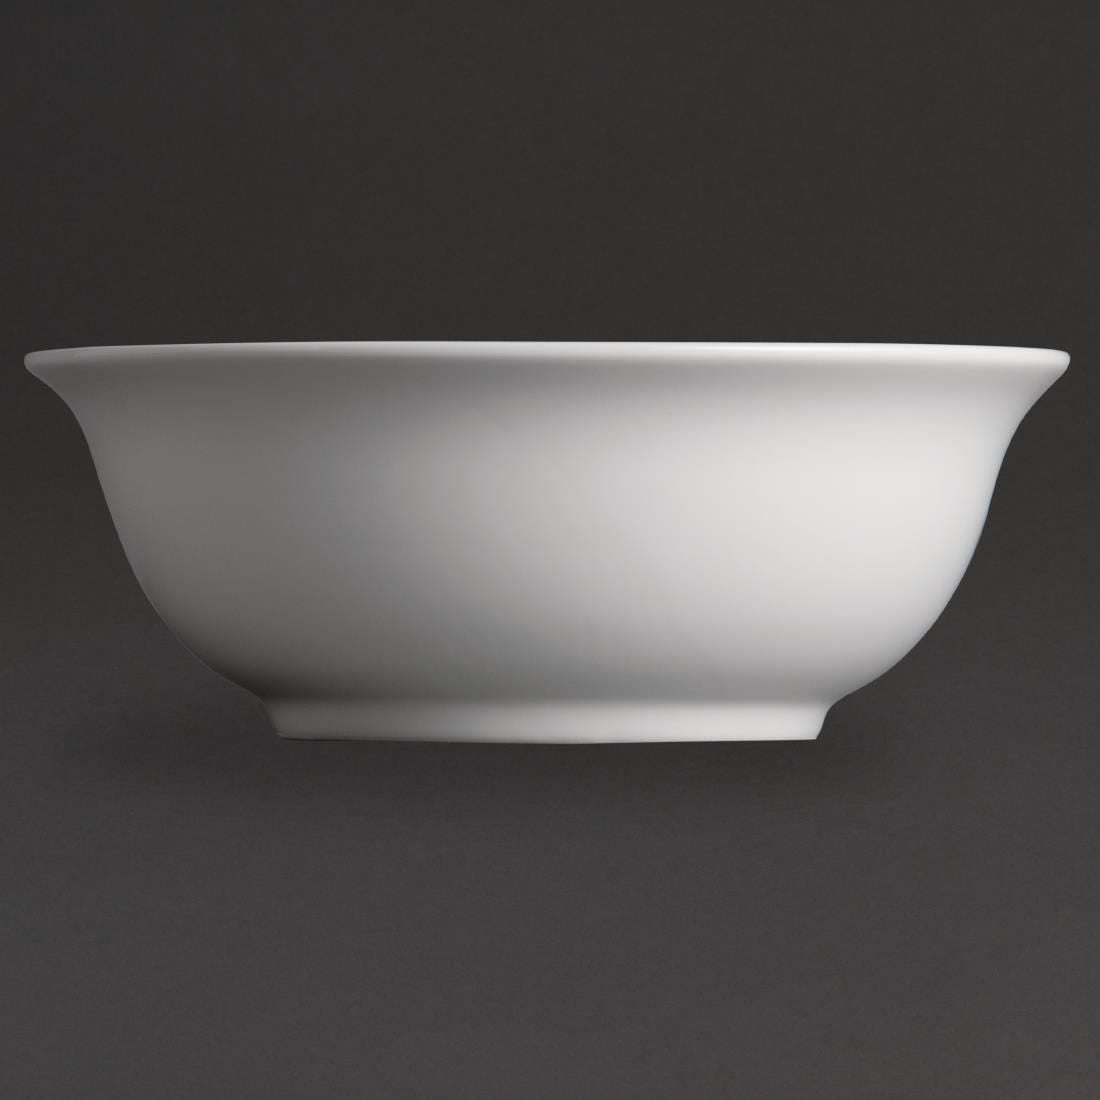 Olympia Whiteware Salad Bowls 235mm (Pack of 6)